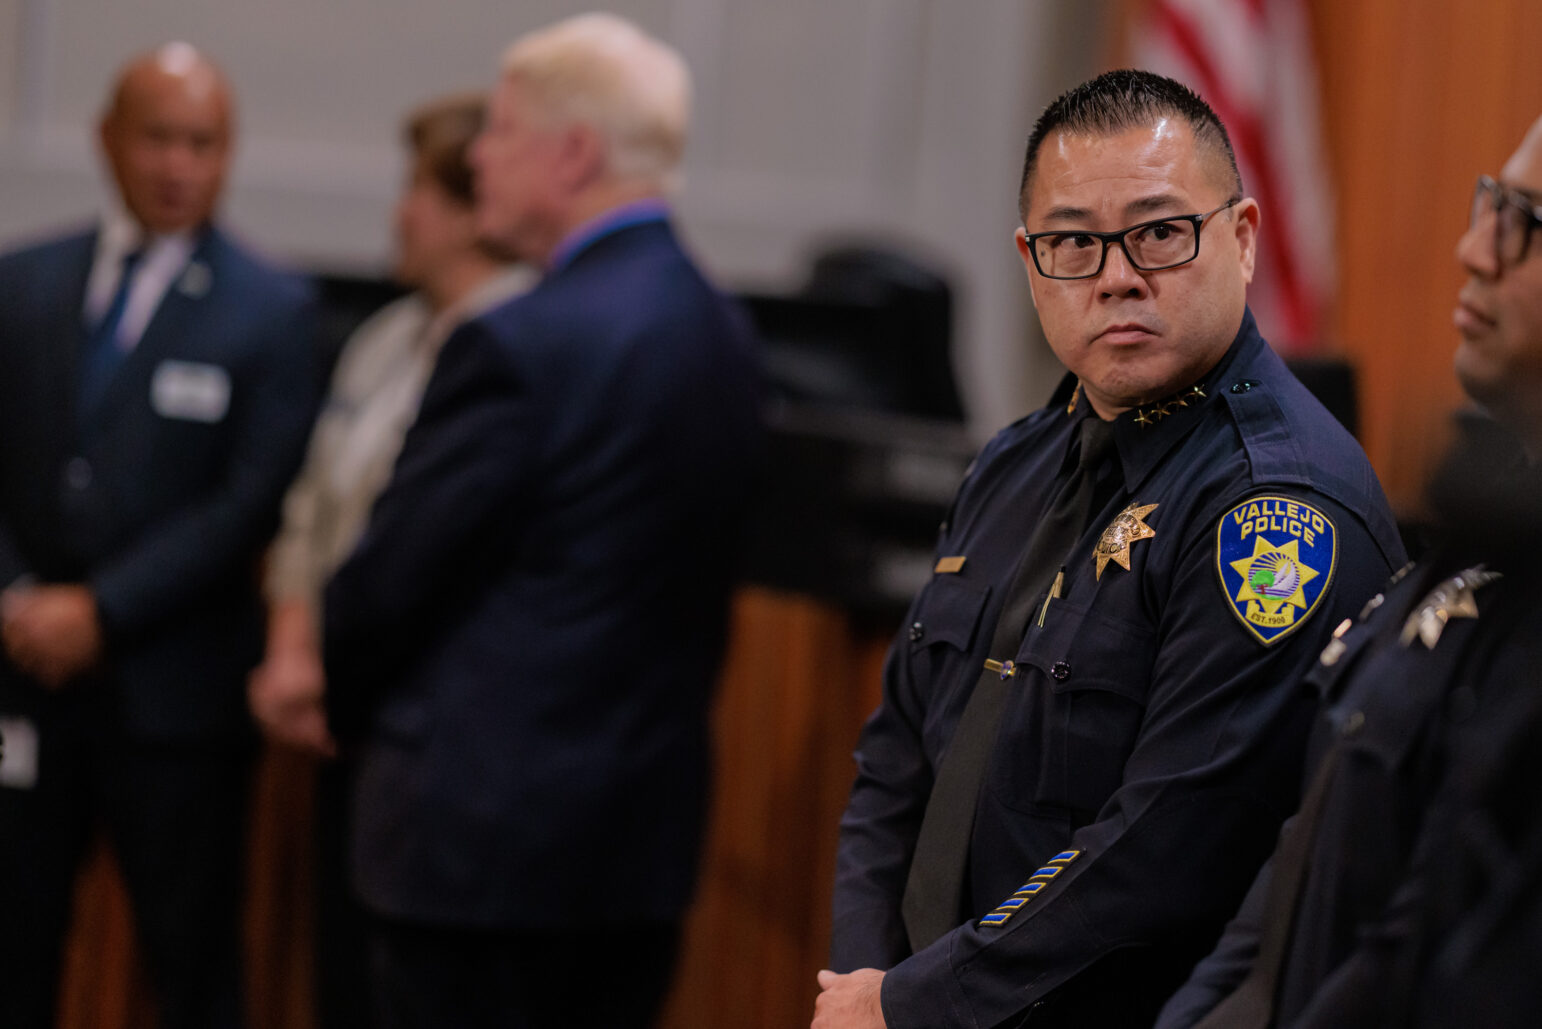 A focused police chief in uniform with the Vallejo Police badge visible, standing with his hands clasped in front of him. In the softly blurred background, several individuals are conversing, wearing professional attire. The setting is inside a city council chambers during a press conference at which California Attorney General Rob Bonta announced a lawsuit and consent decree against he Vallejo Police Department.